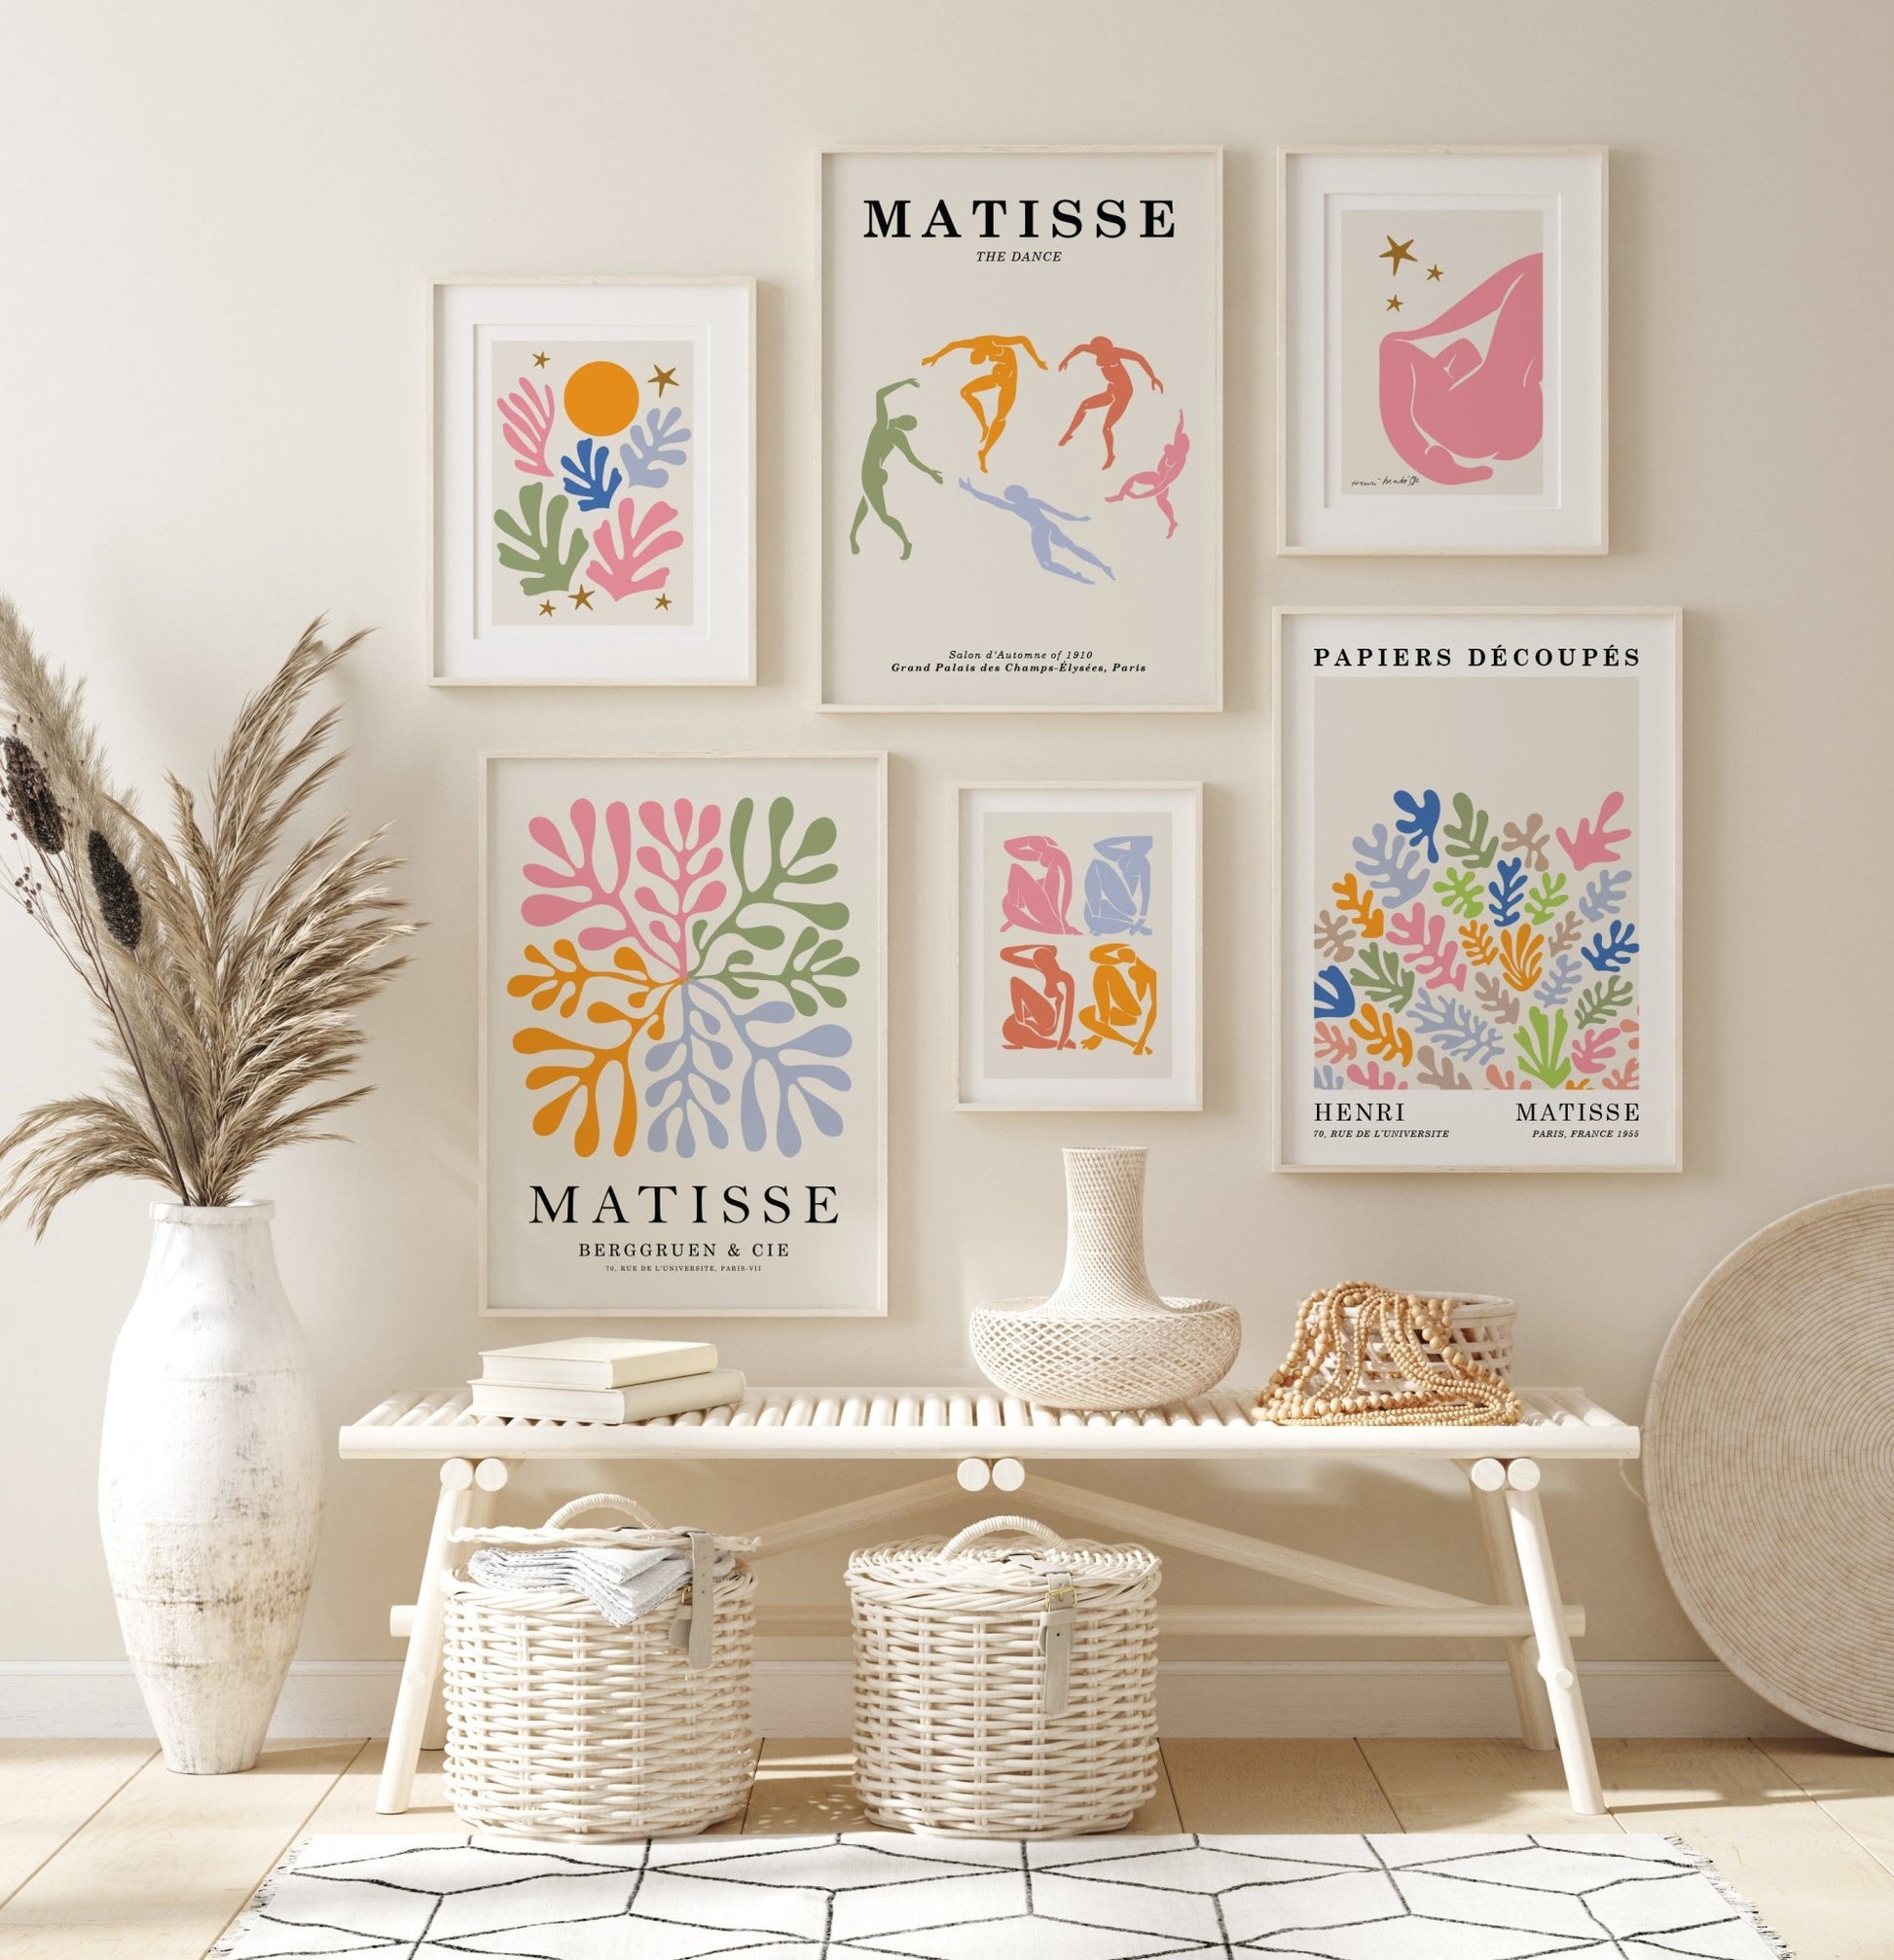 Colorful Henri Matisse prints hang on neutral walls in a room.